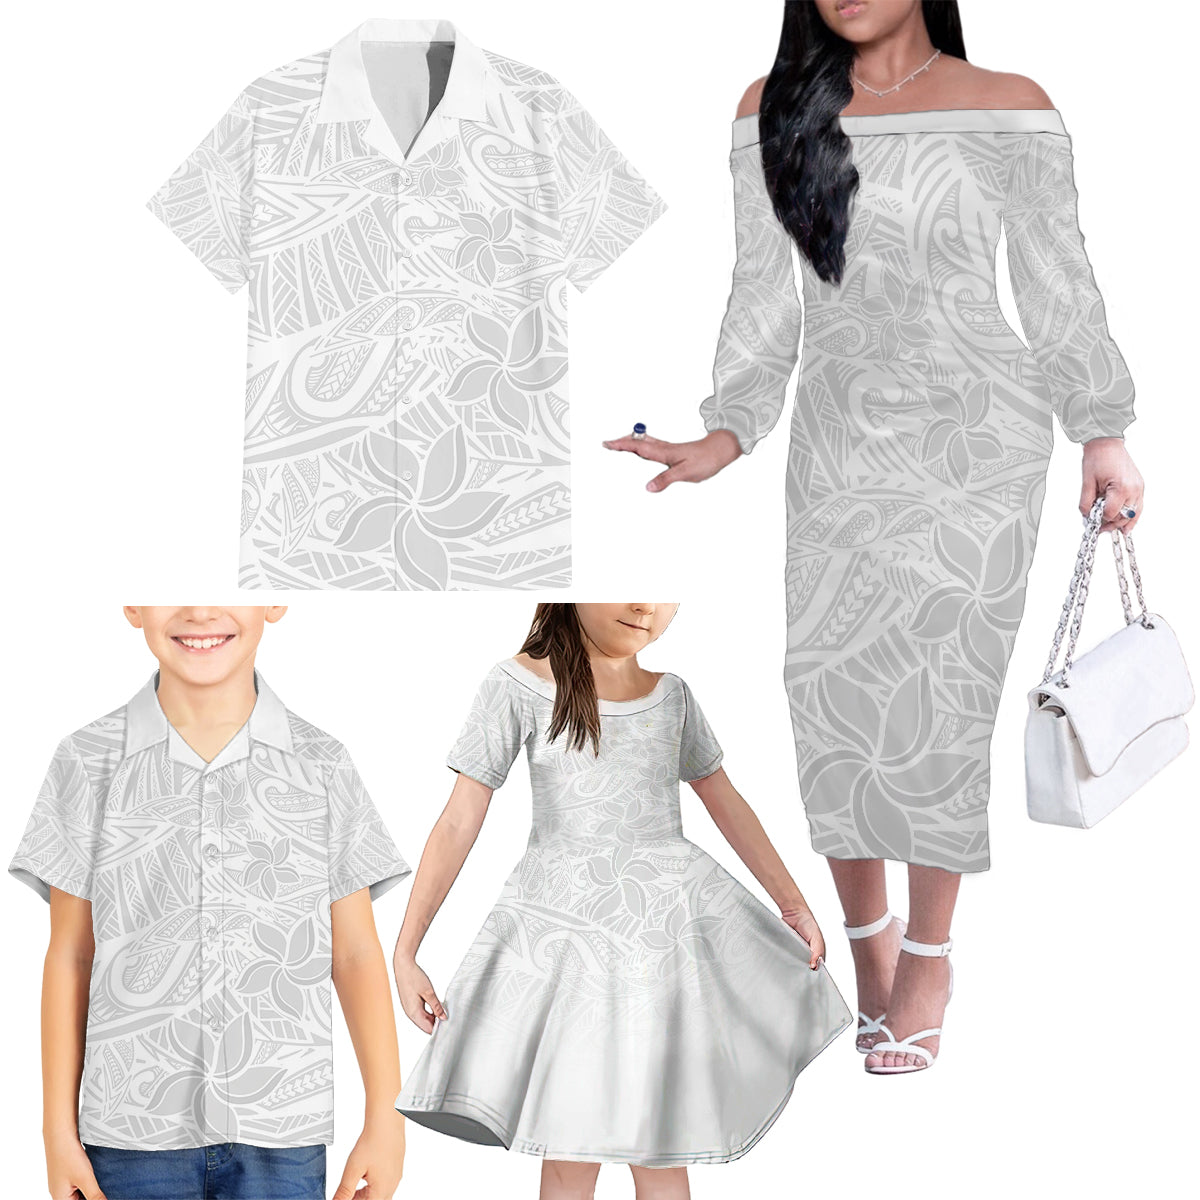 Polynesia White Sunday Family Matching Off Shoulder Long Sleeve Dress and Hawaiian Shirt Polynesian Pattern With Tropical Flowers LT14 - Polynesian Pride